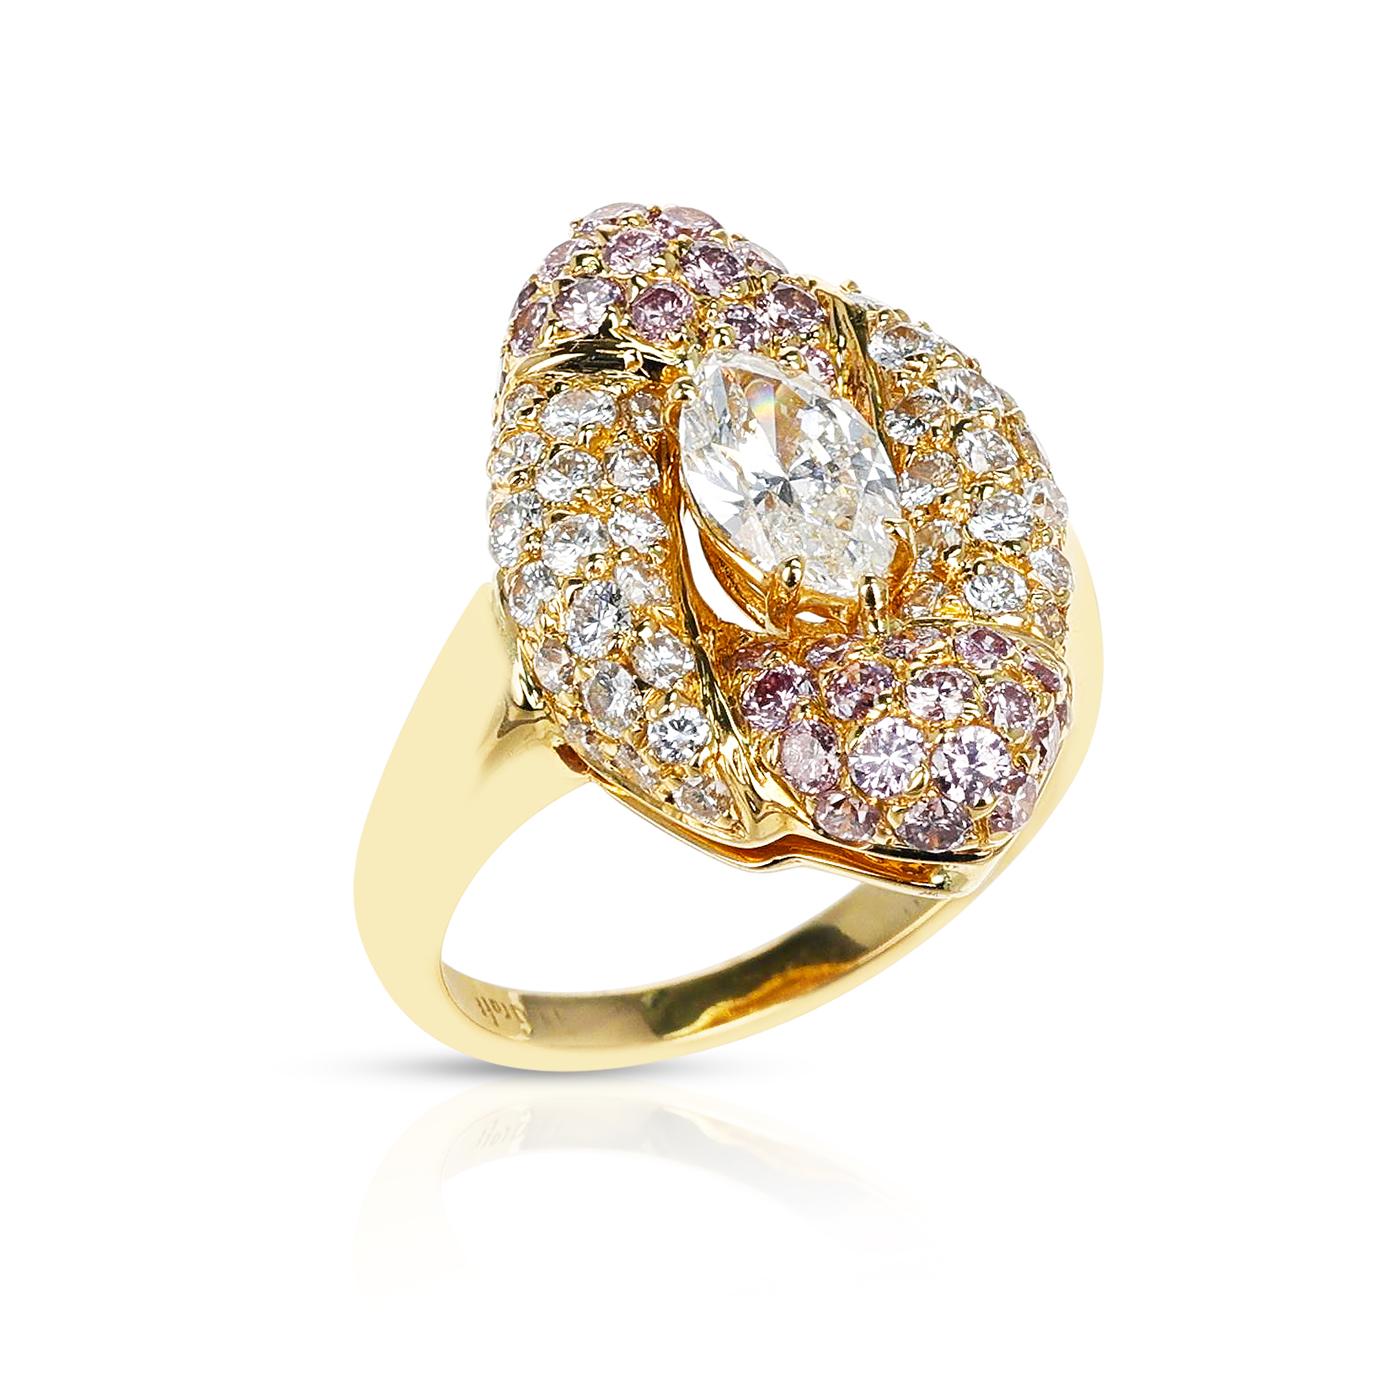 A stunning Graff GIA Certified 0.74 carat Marquise Ring with Round White and Pink Diamonds, made in 18 Karat Yellow Gold. The GIA Certificate states that the 0.74 carat Marquise Diamond is F color and VS1 clarity. There are appx. 0.41 Carats of